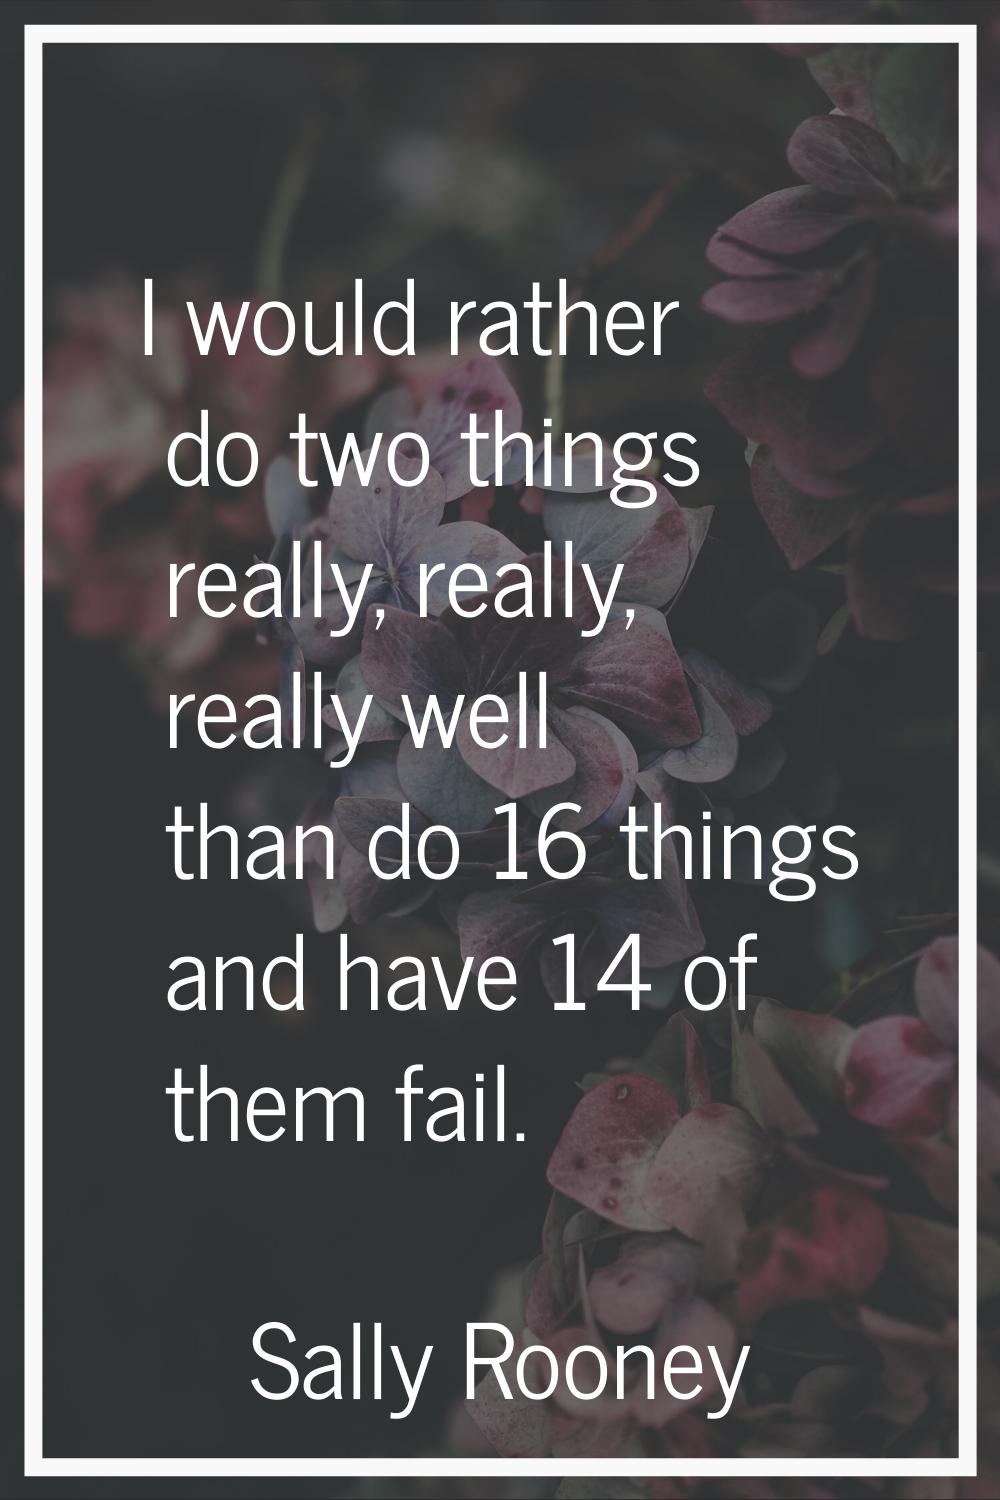 I would rather do two things really, really, really well than do 16 things and have 14 of them fail